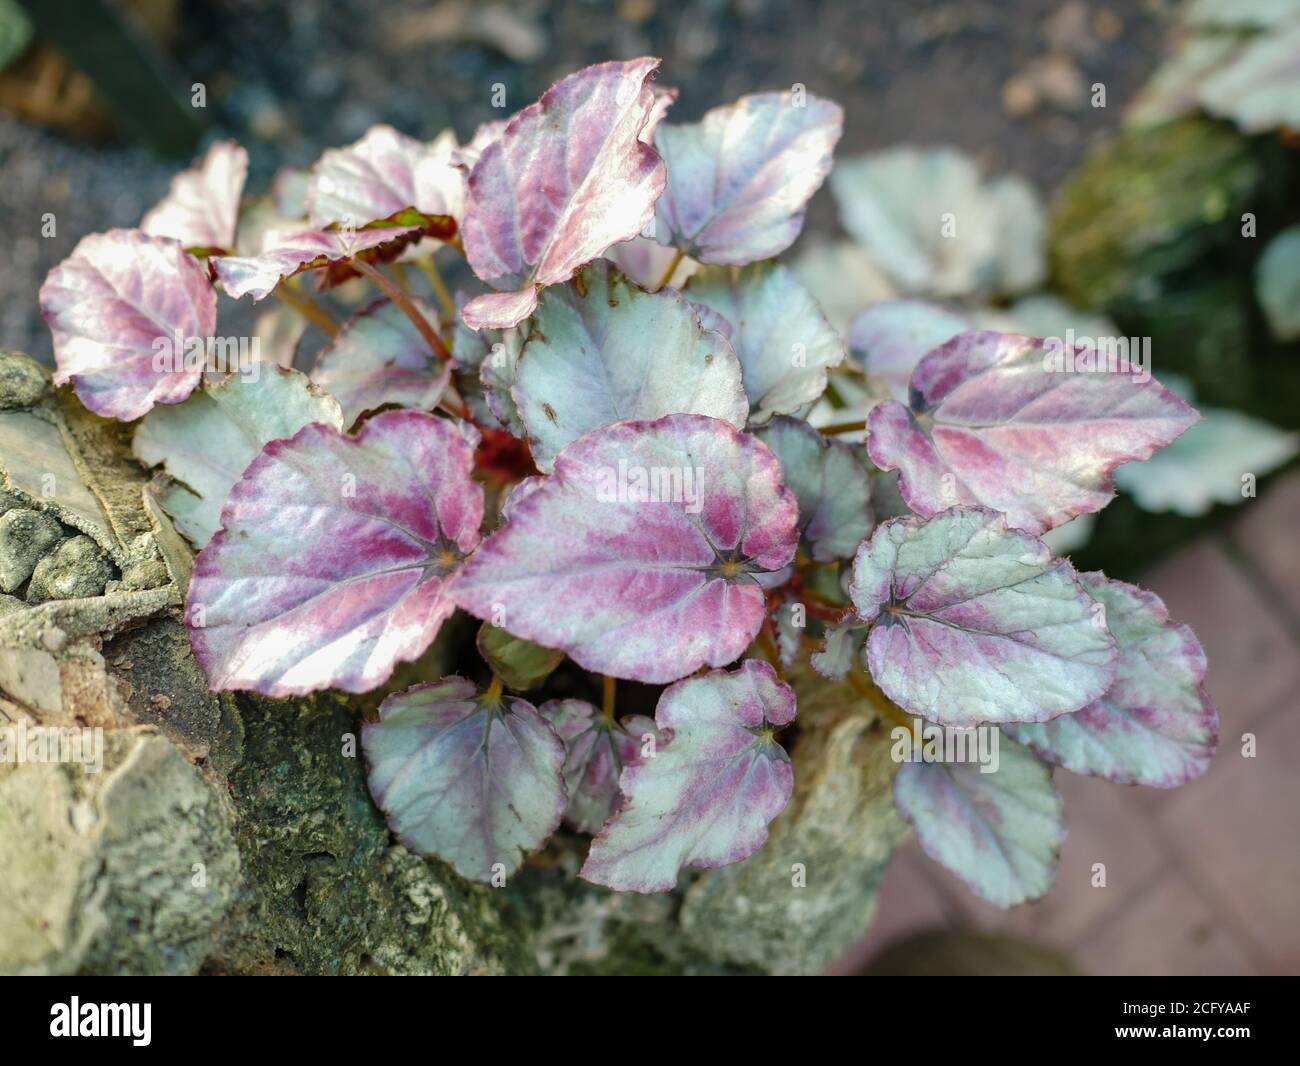 Small ornamental plants used for gardening trays. Stock Photo